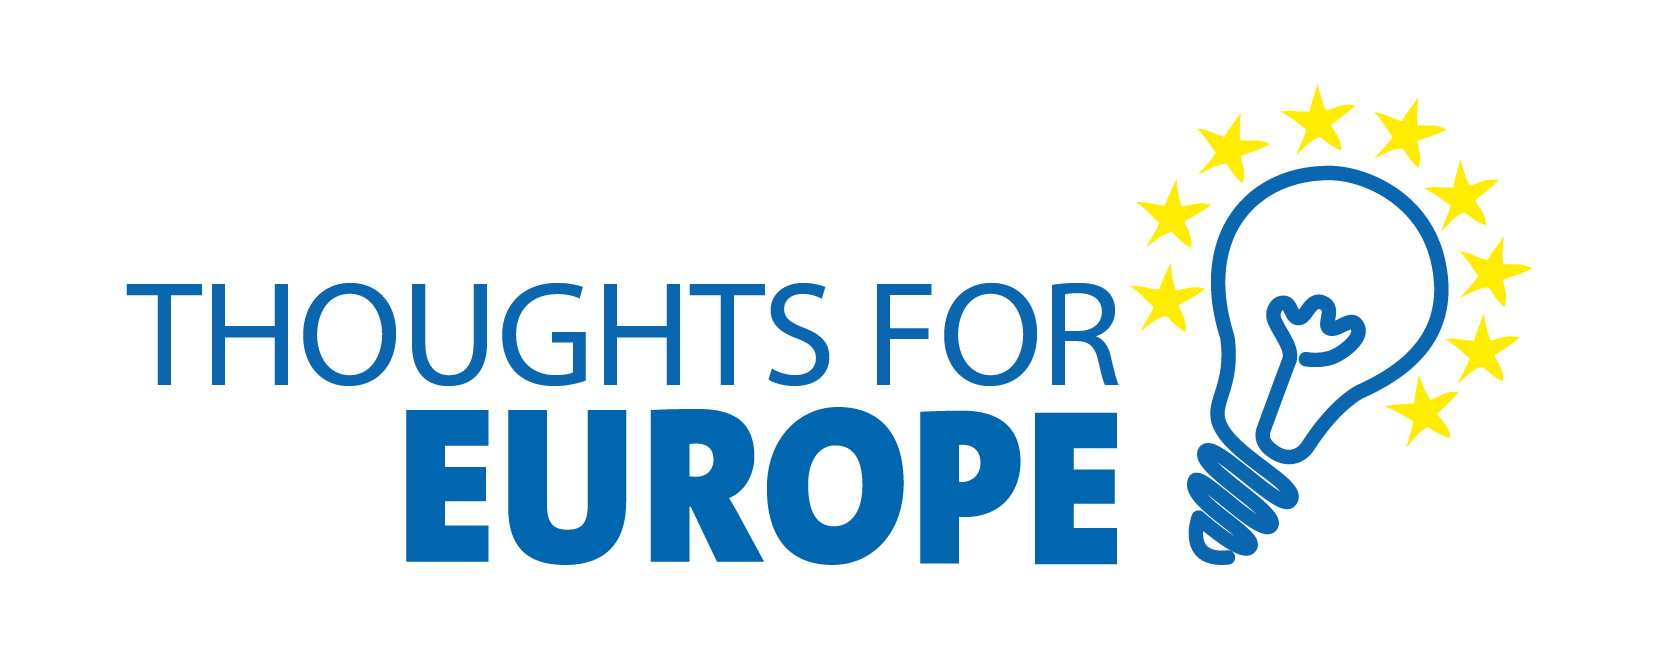 Thoughts for Europe_logo 1